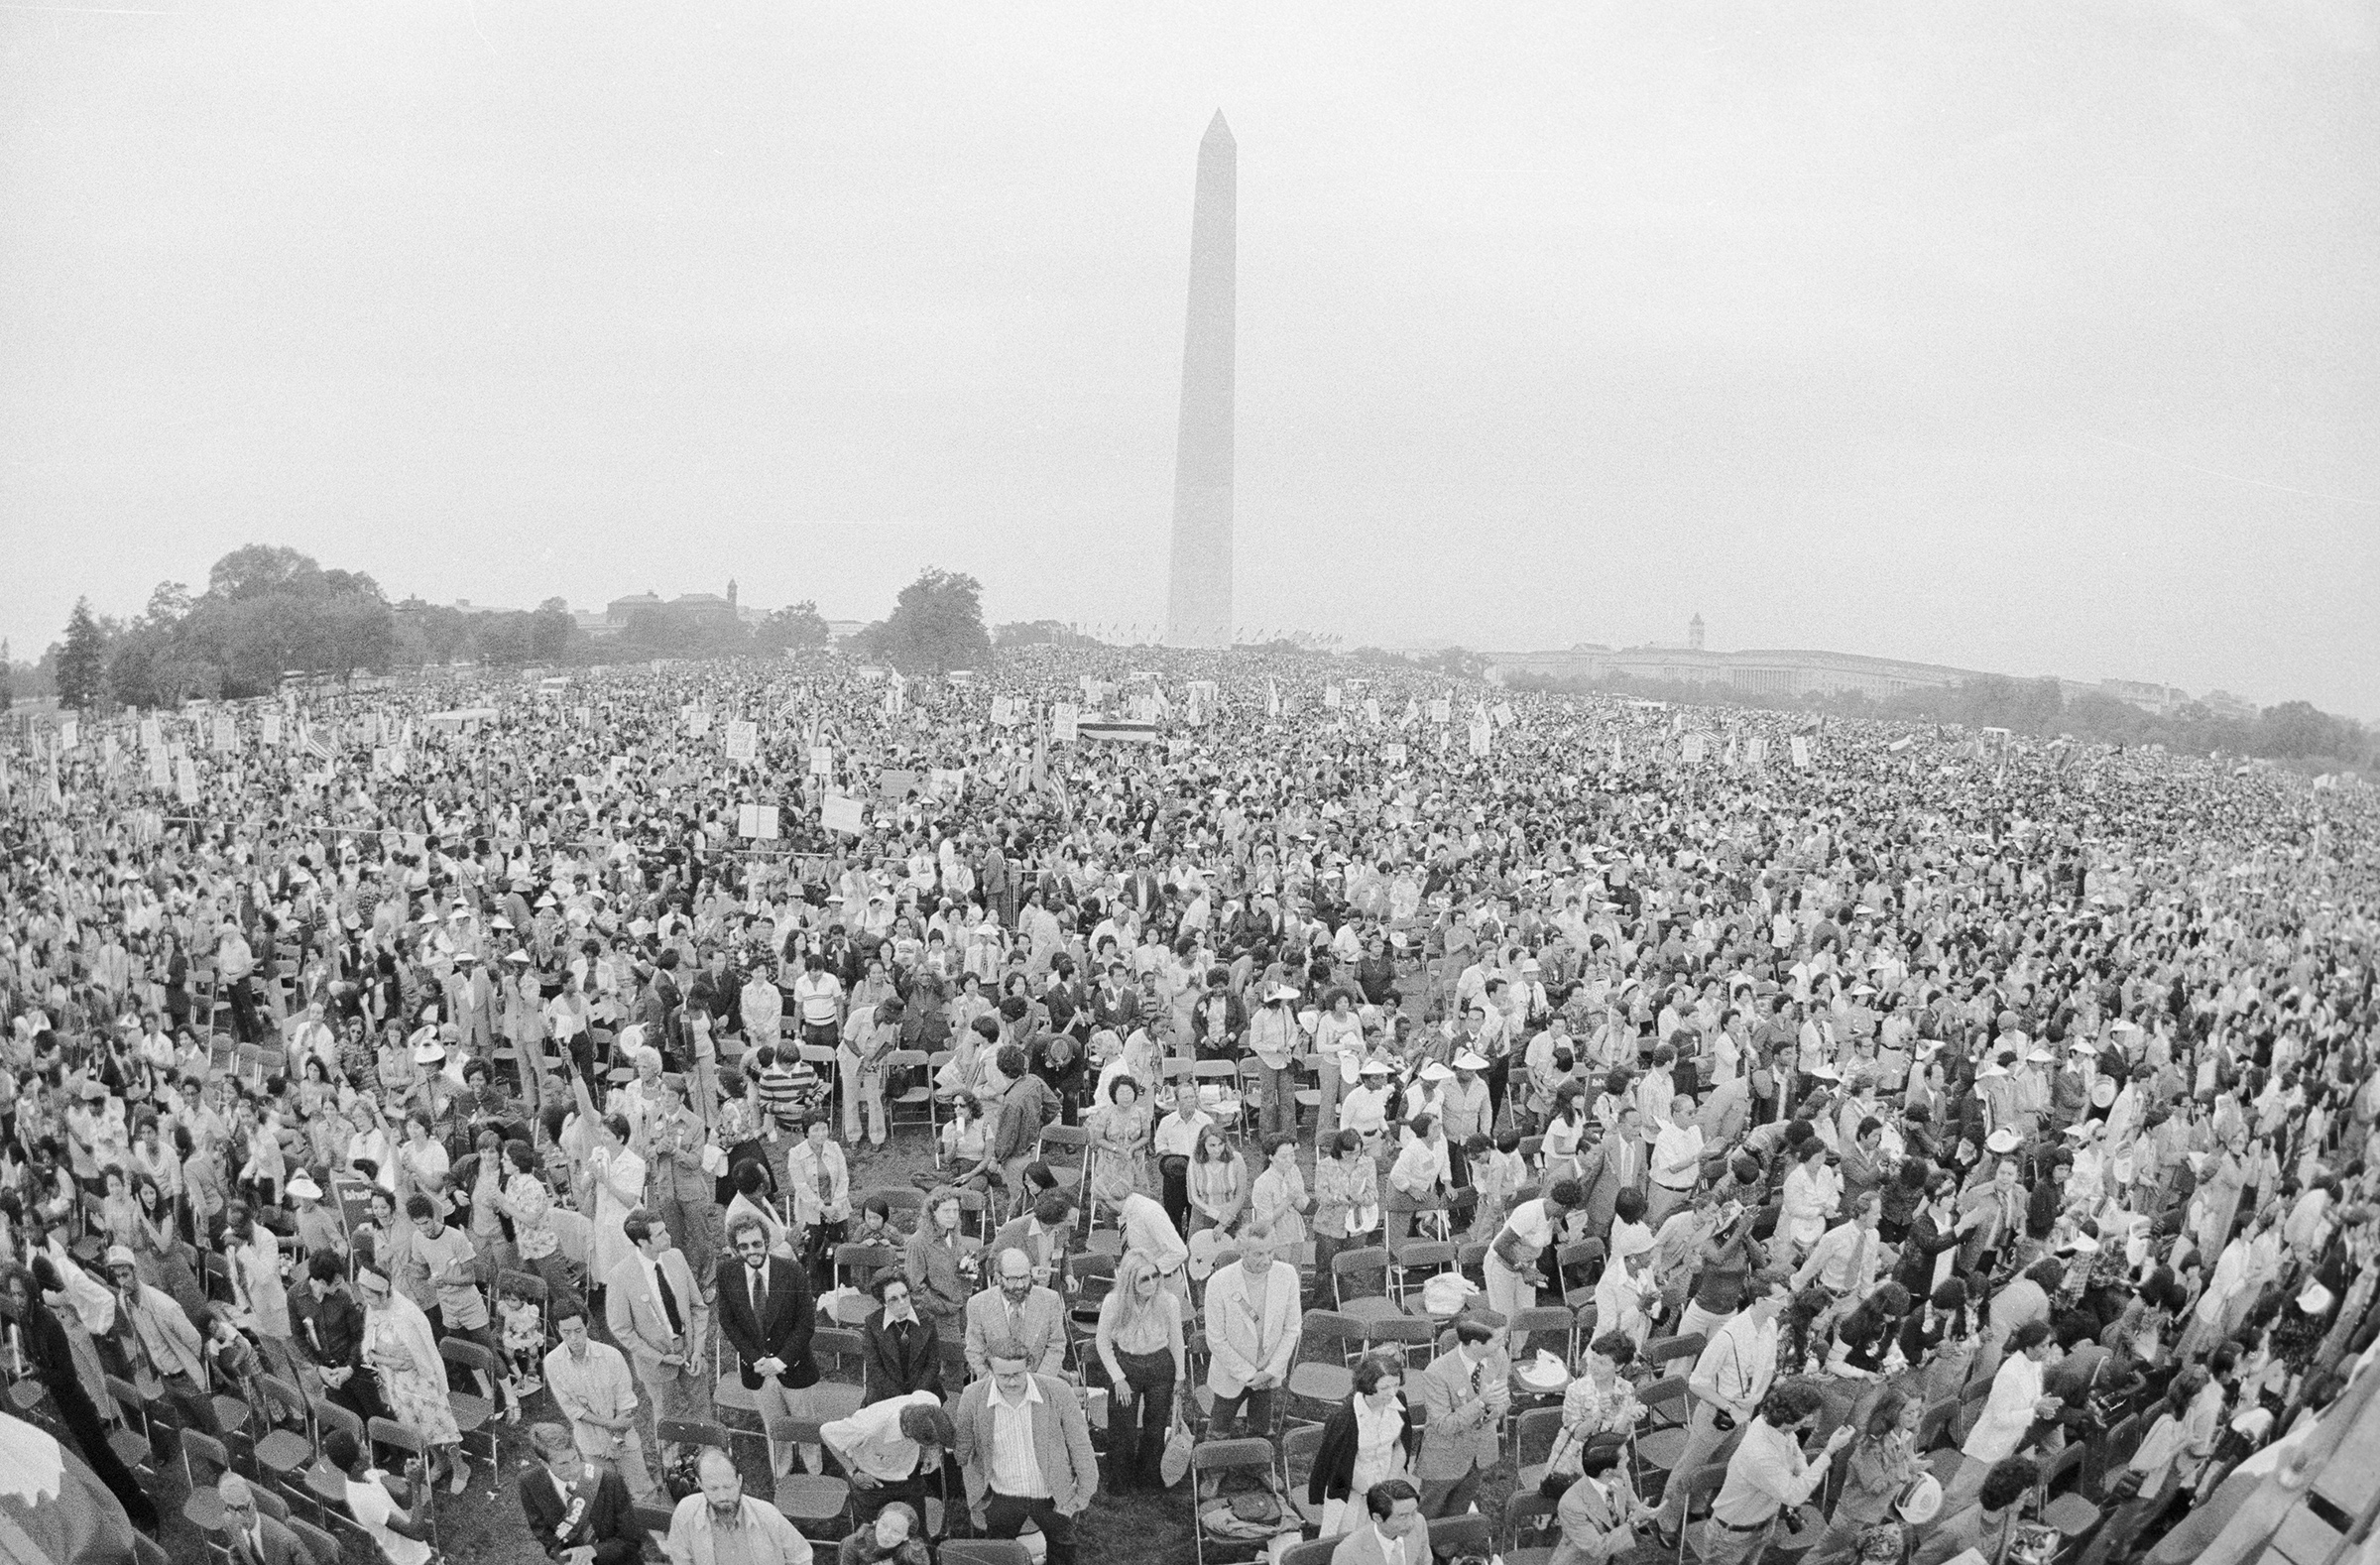 Crowds gather on the Washington Monument Grounds for a "God Bless America Festival" sponsored by Reverend Sun Myung Moon, the Korean evangelist, and his Unification Church on Sept. 18, 1976.